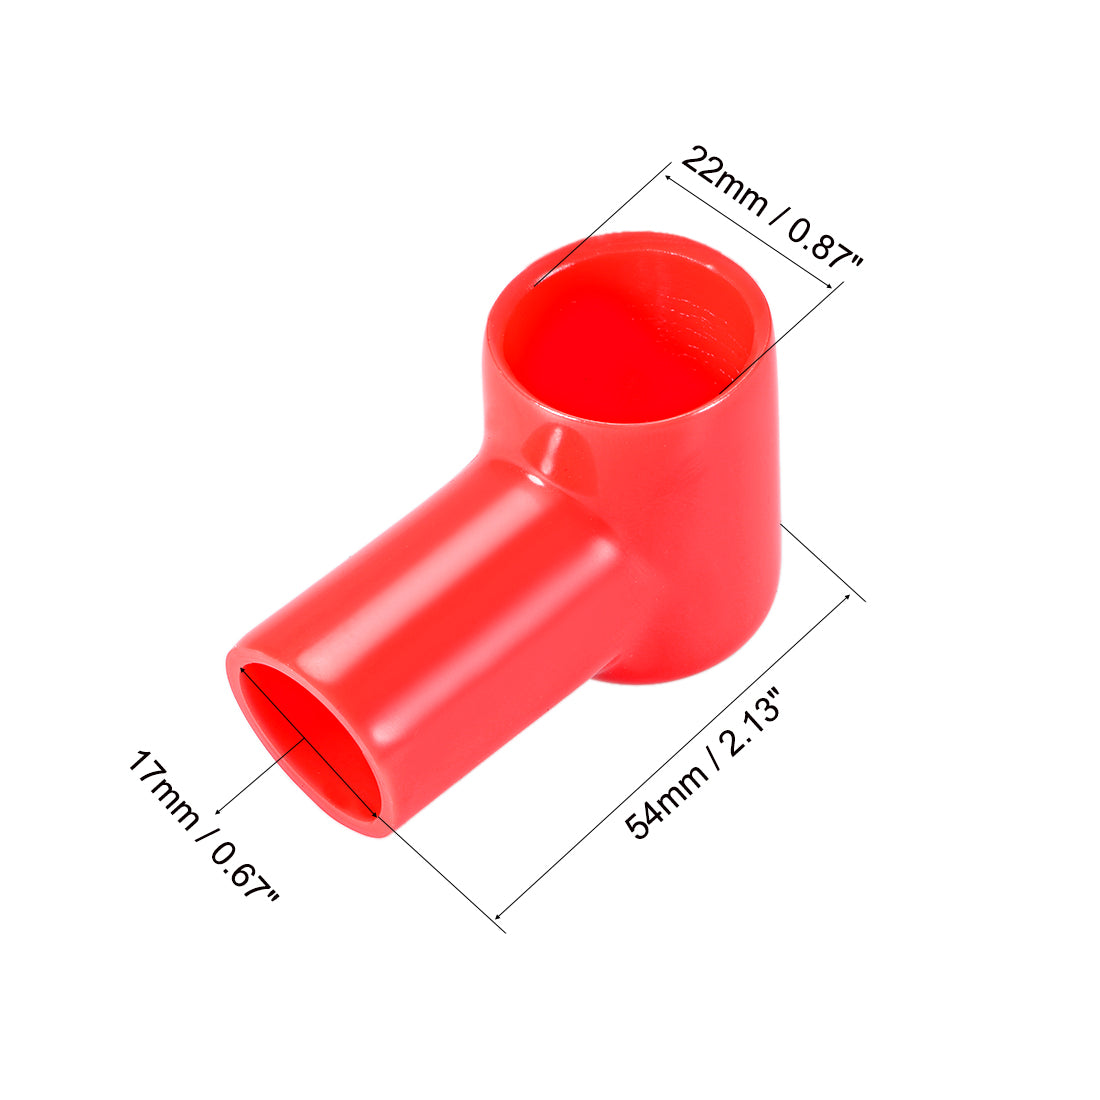 uxcell Uxcell Battery Terminal Insulating Rubber Protector Covers for 22mm Terminal 17mm Cable Red Black 5 Pairs